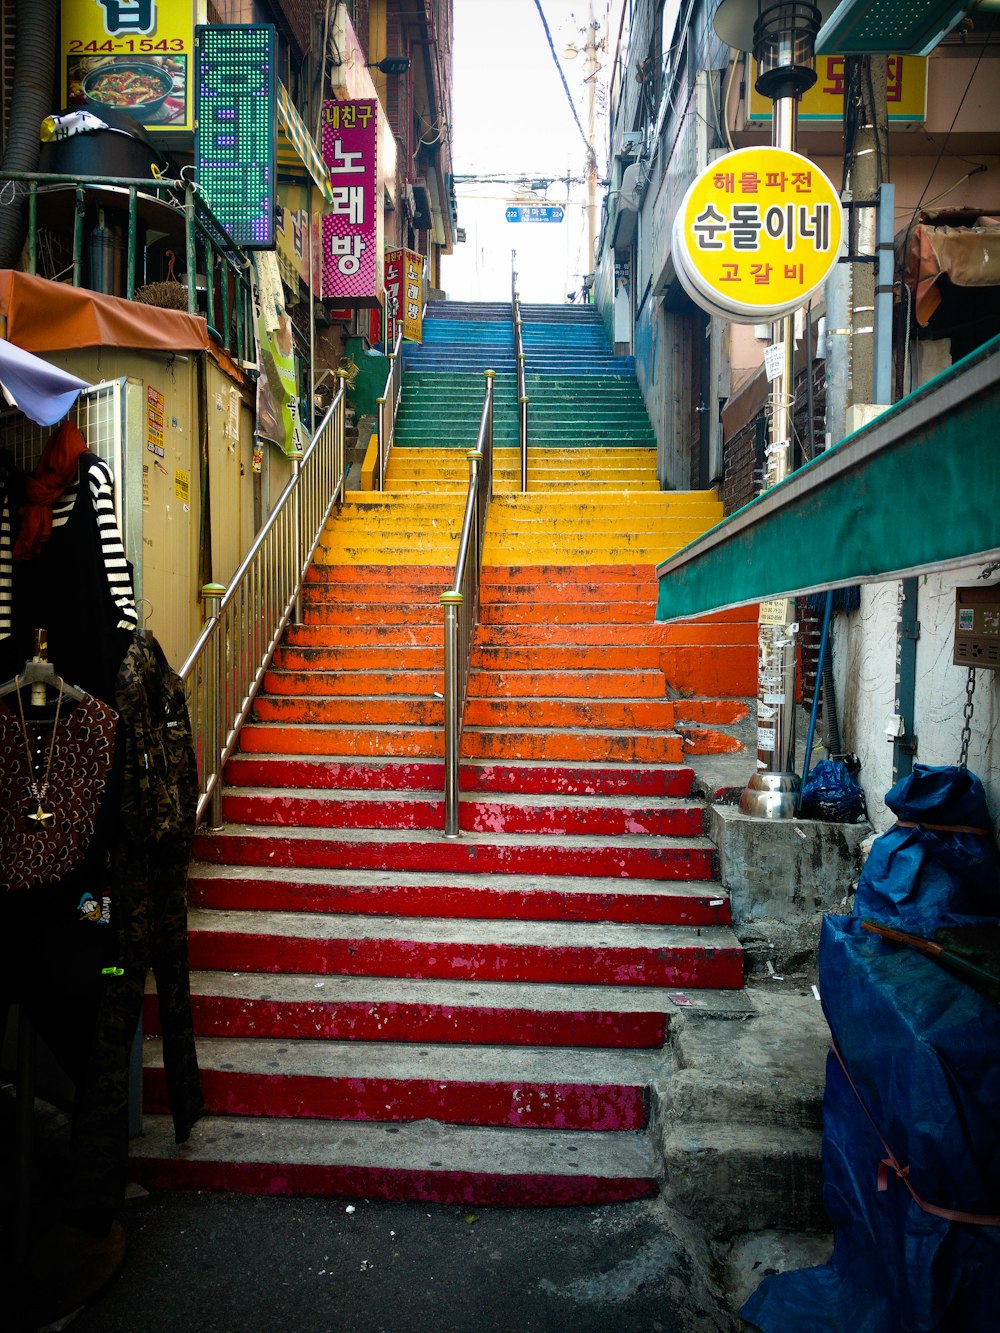 multicolored concrete stairs during daytime